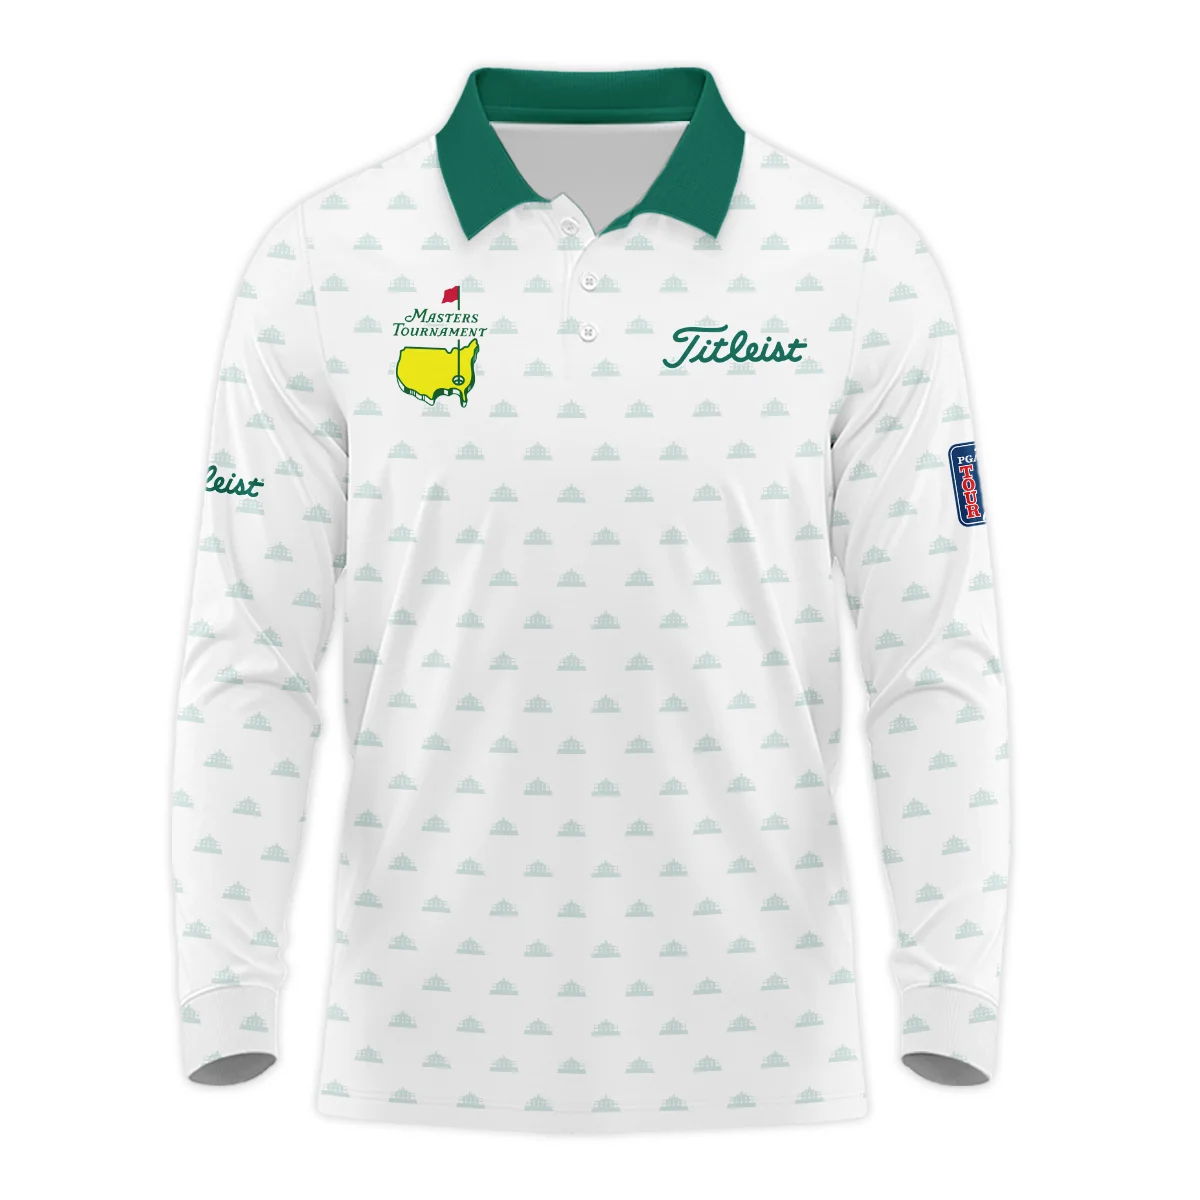 Masters Tournament Golf Sport Titleist Long Polo Shirt Sports Cup Pattern White Green Long Polo Shirt For Men